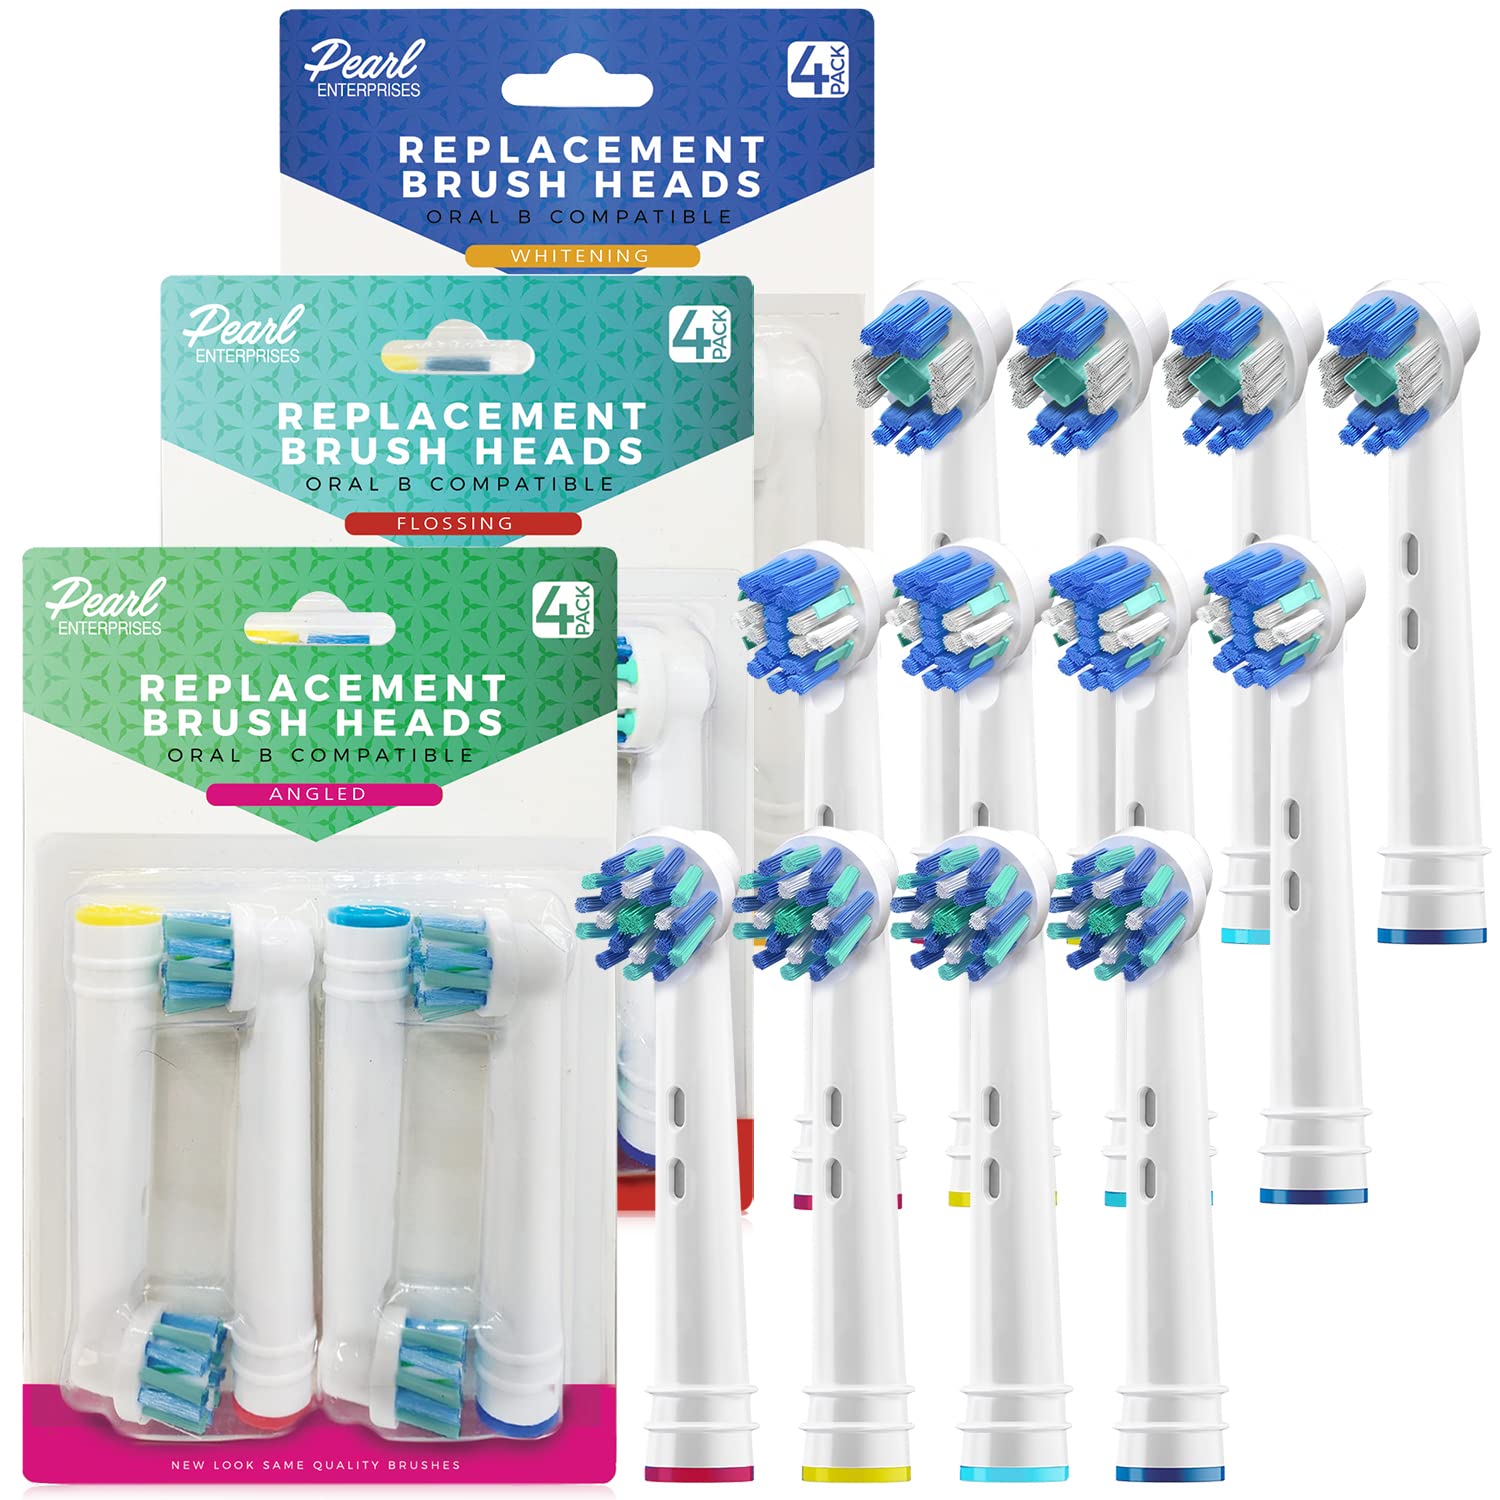 Pearl Enterprises Replacement Toothbrush Heads for Oral B- 12 PK Electric Toothbrush Assorted Heads Refill Fits Oral-b Braun Kids, pro, 1000, Professional Care, 3D, 2000 & More!